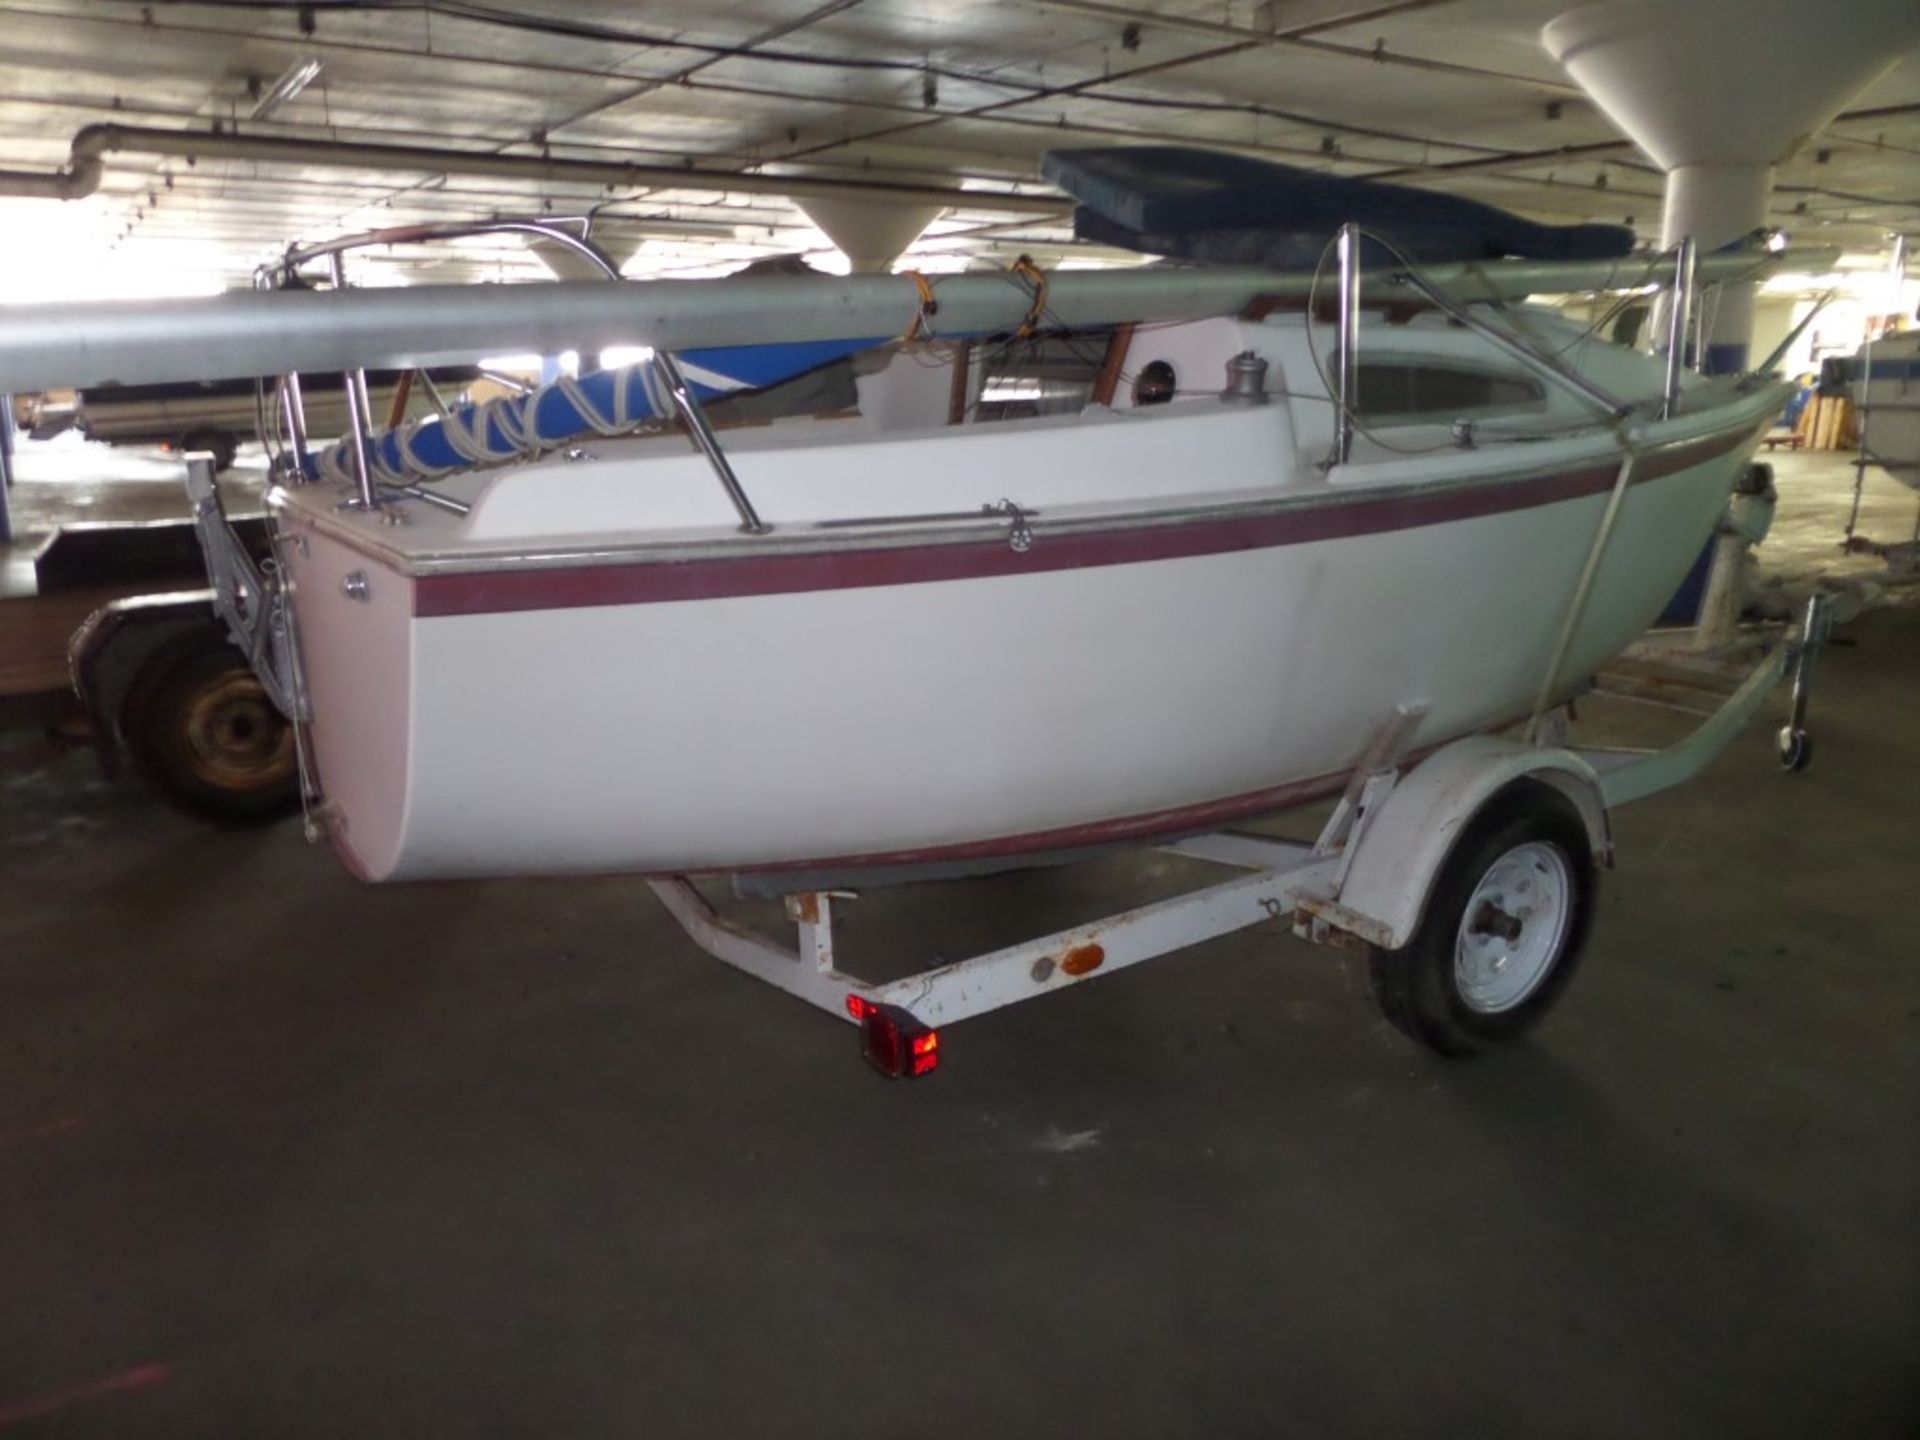 20' Sail Boat & Trailer - Bill of Sale - Image 7 of 8